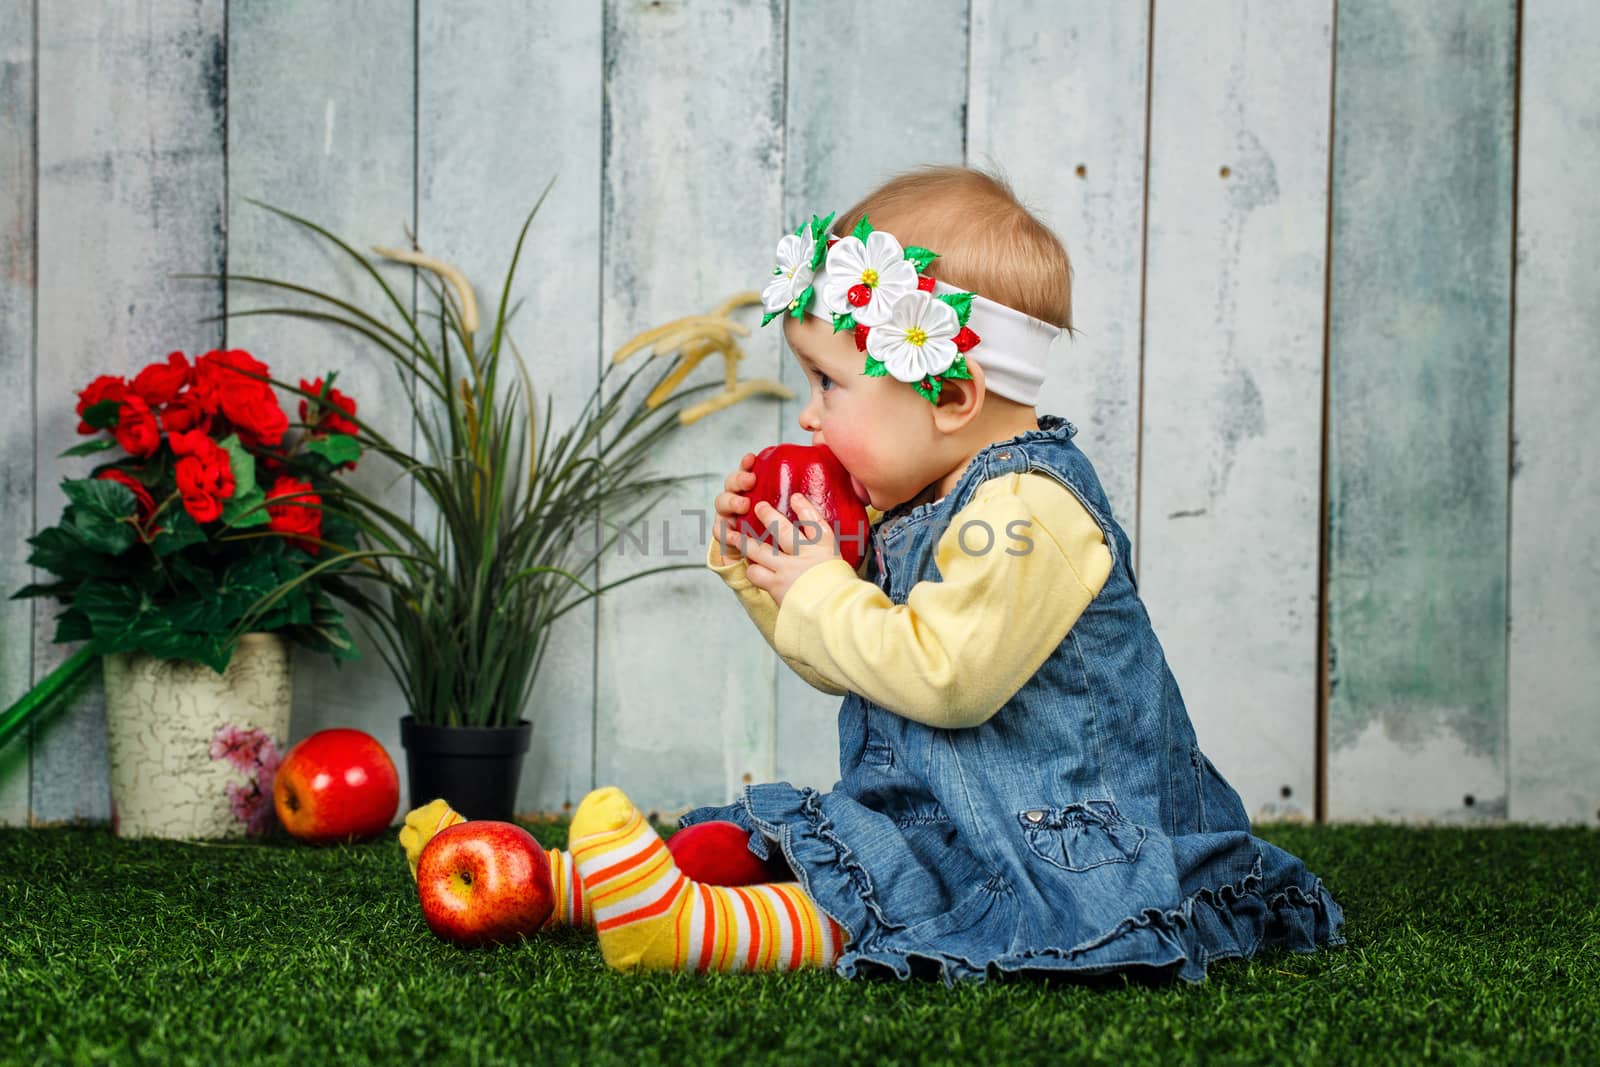 Little girl in the backyard sits on a lawn and eats an apple